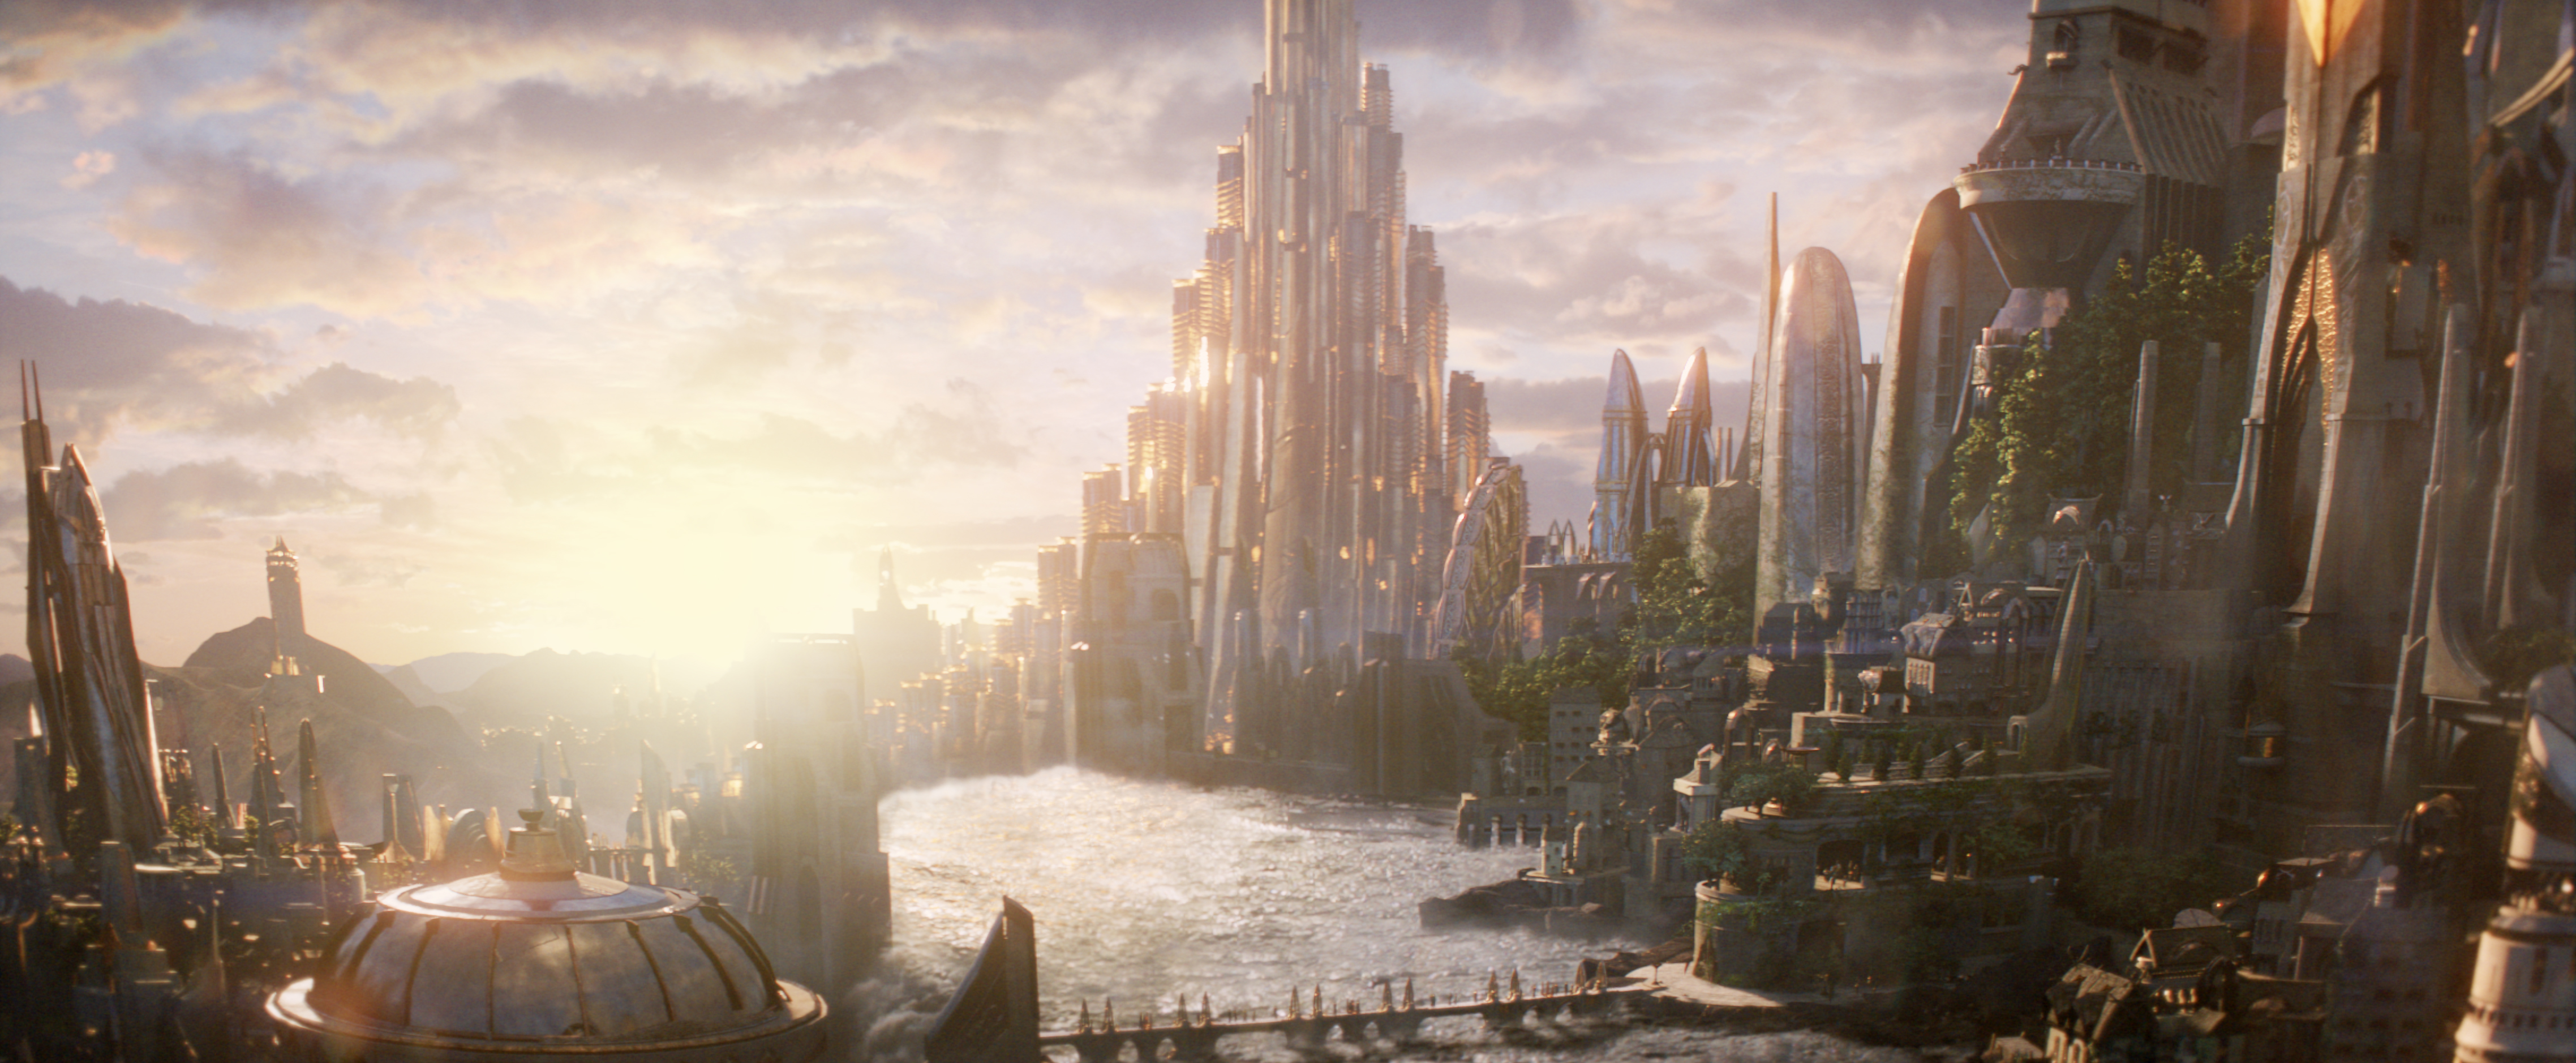 Asgard as depicted in the MCU is a combination of advanced and medieval styles.